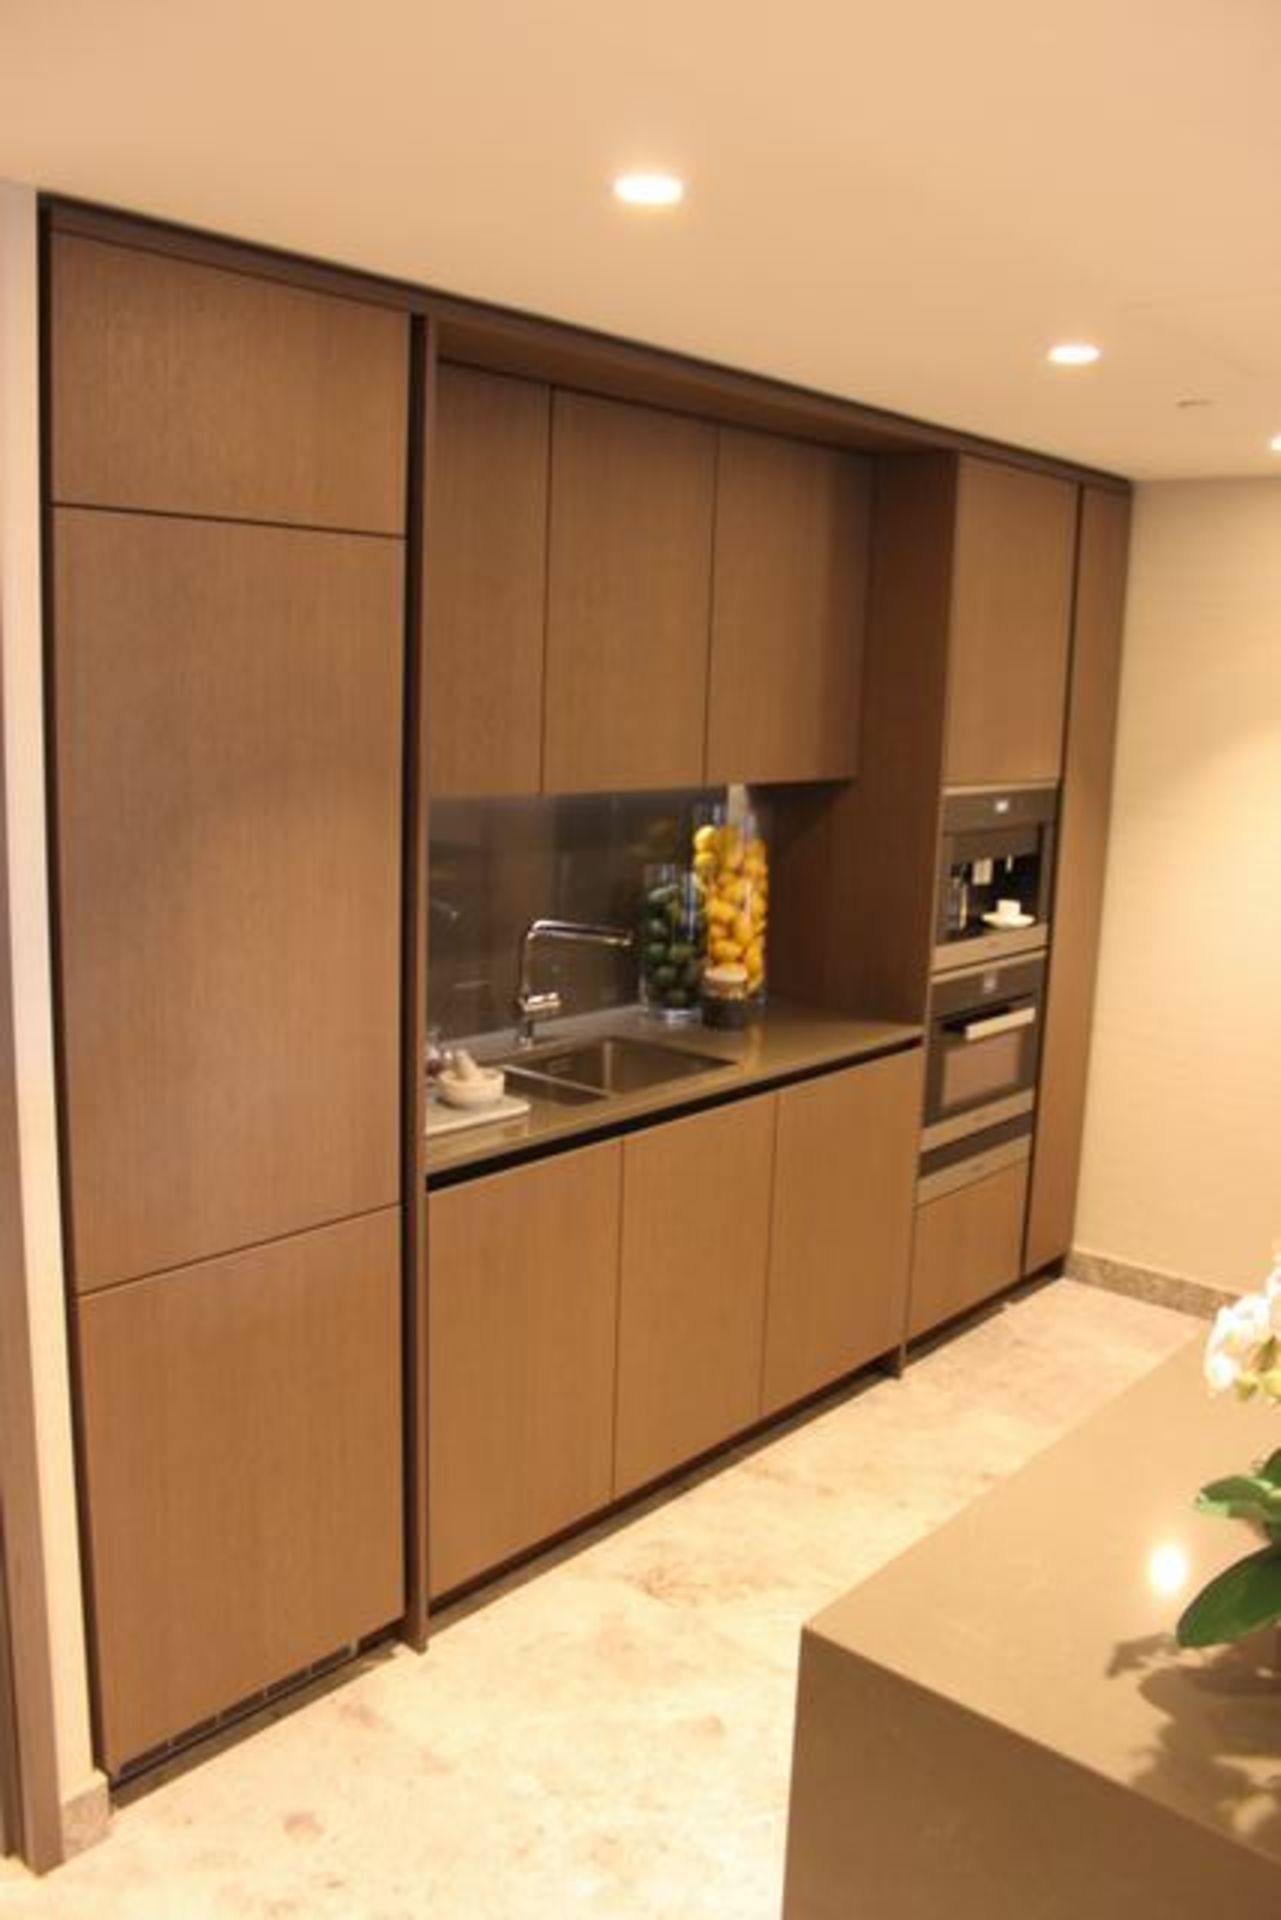 Snaidero Designer Italian kitchen the modern kitchen design that comprises base and wall cabinets